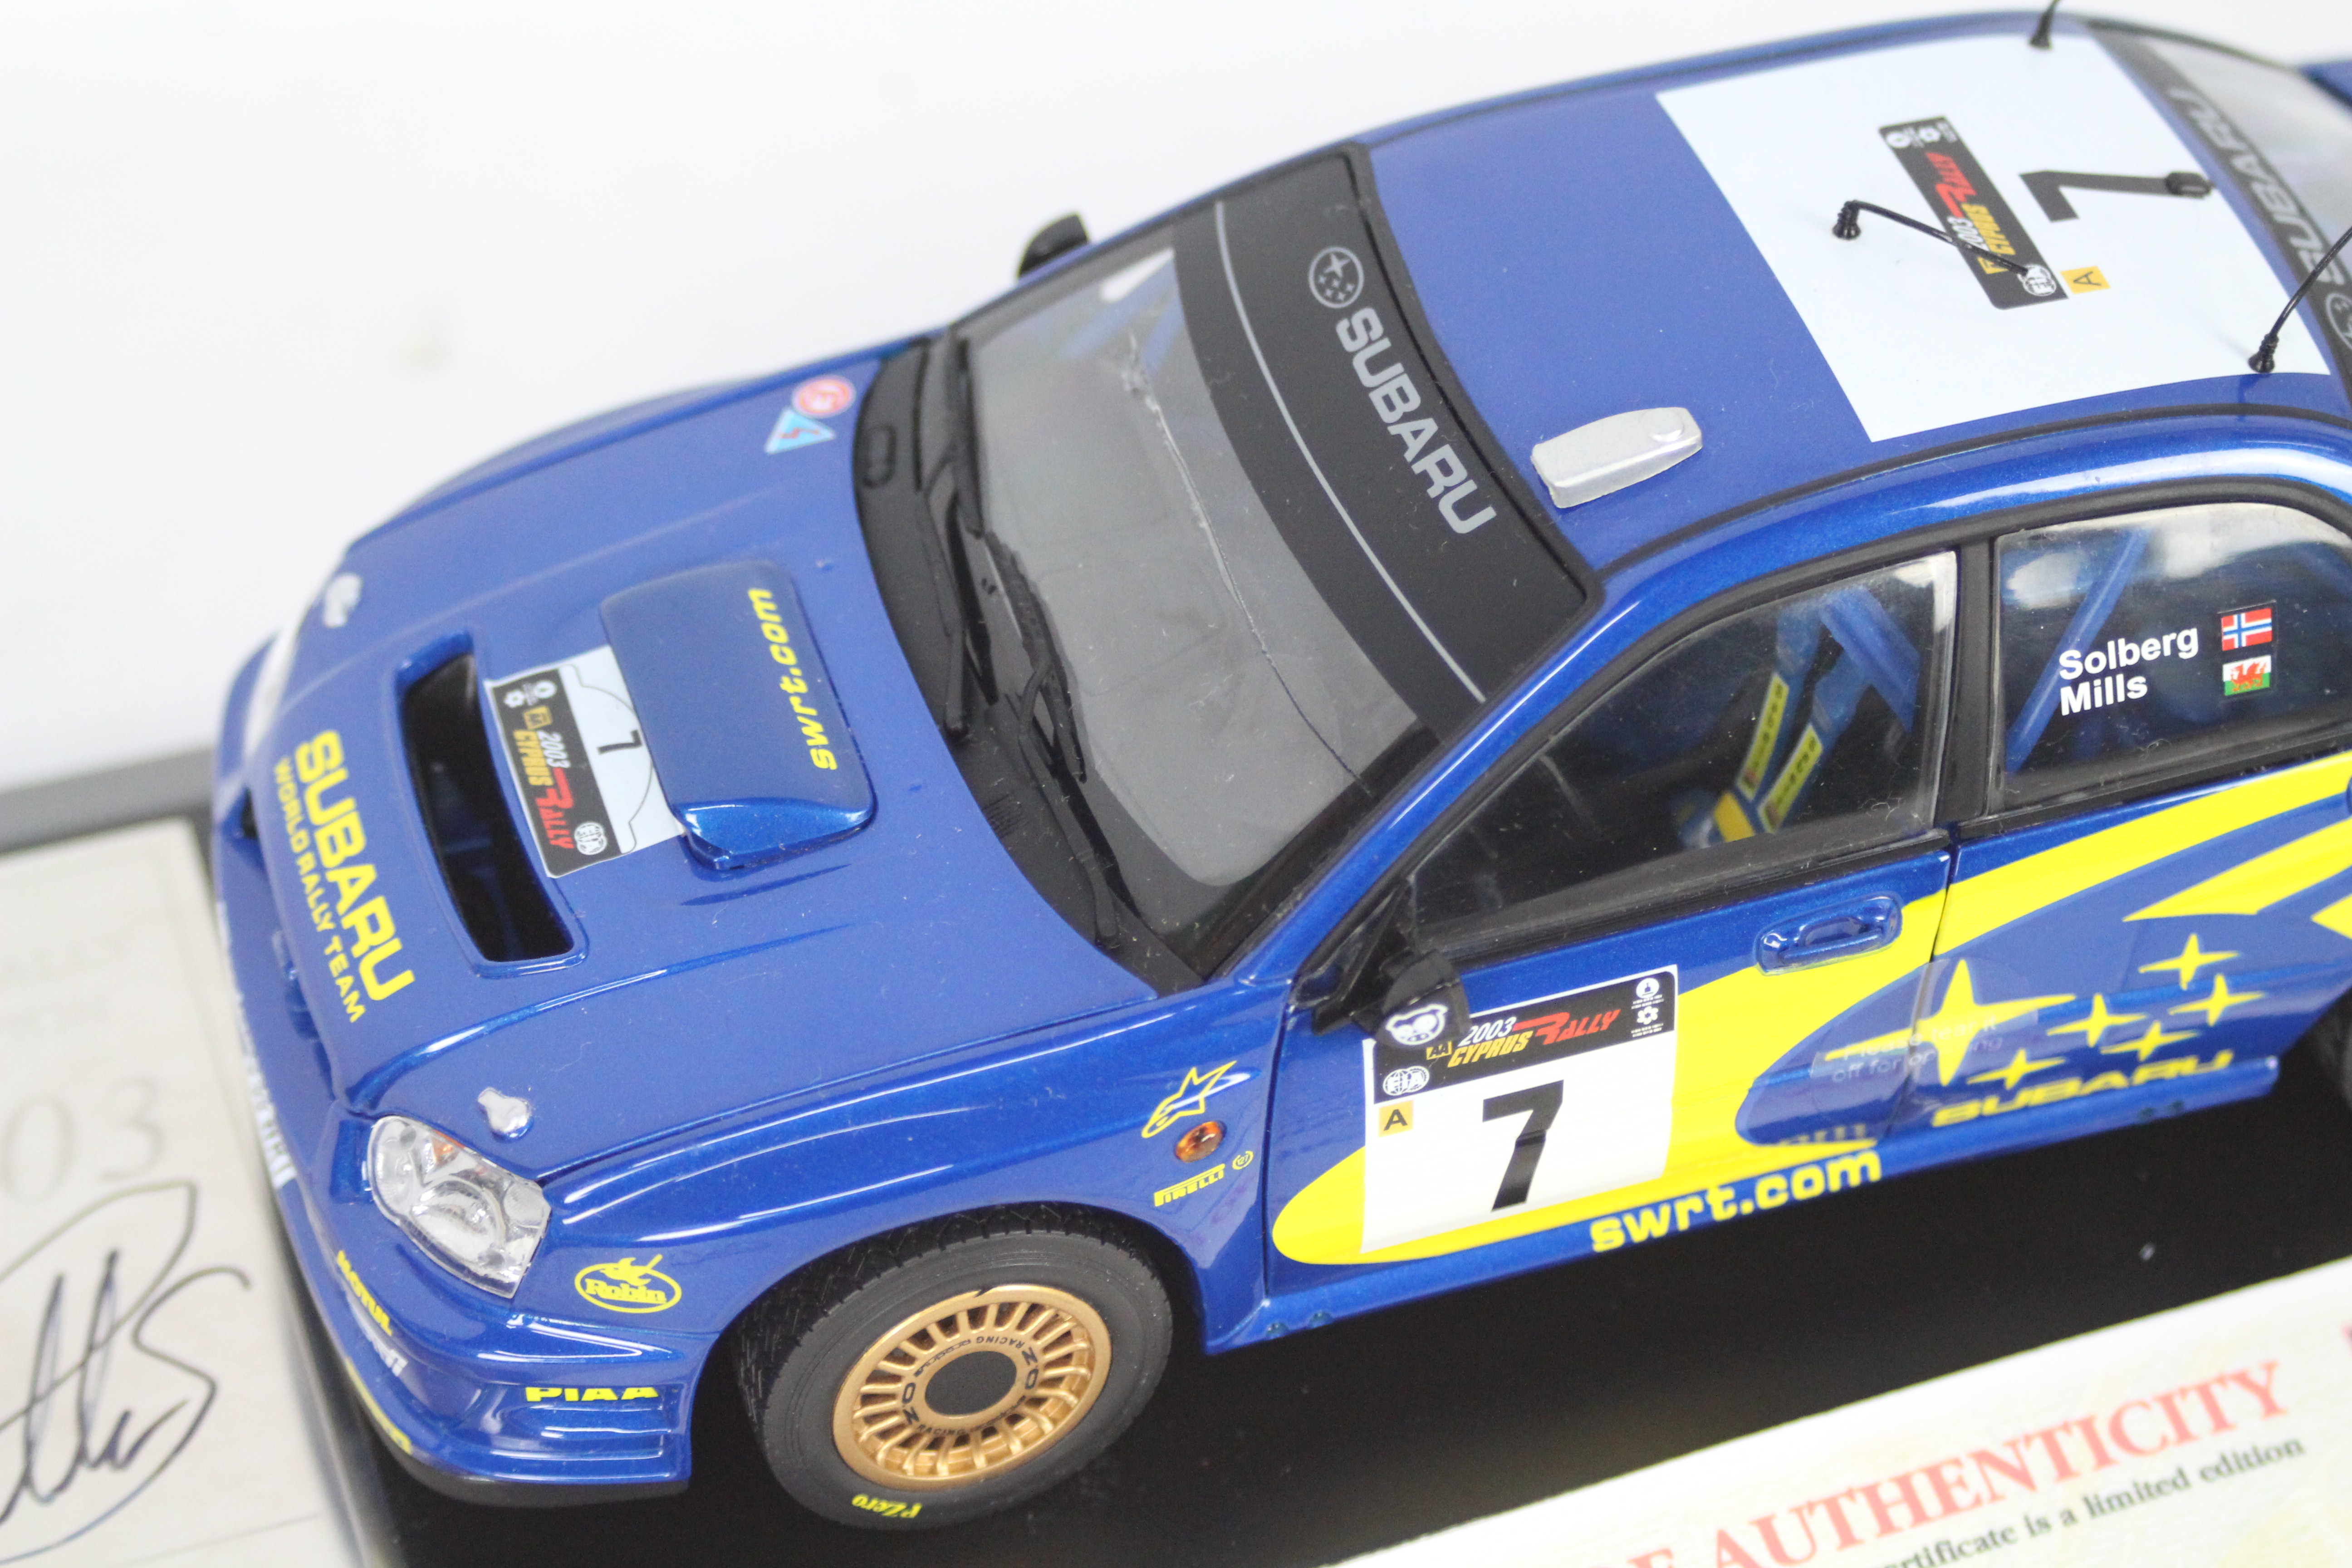 Sunstar - A signed limited edition 1:18 Subaru Impreza WRC Rally Of Finland 2003 car with a plinth - Image 3 of 5